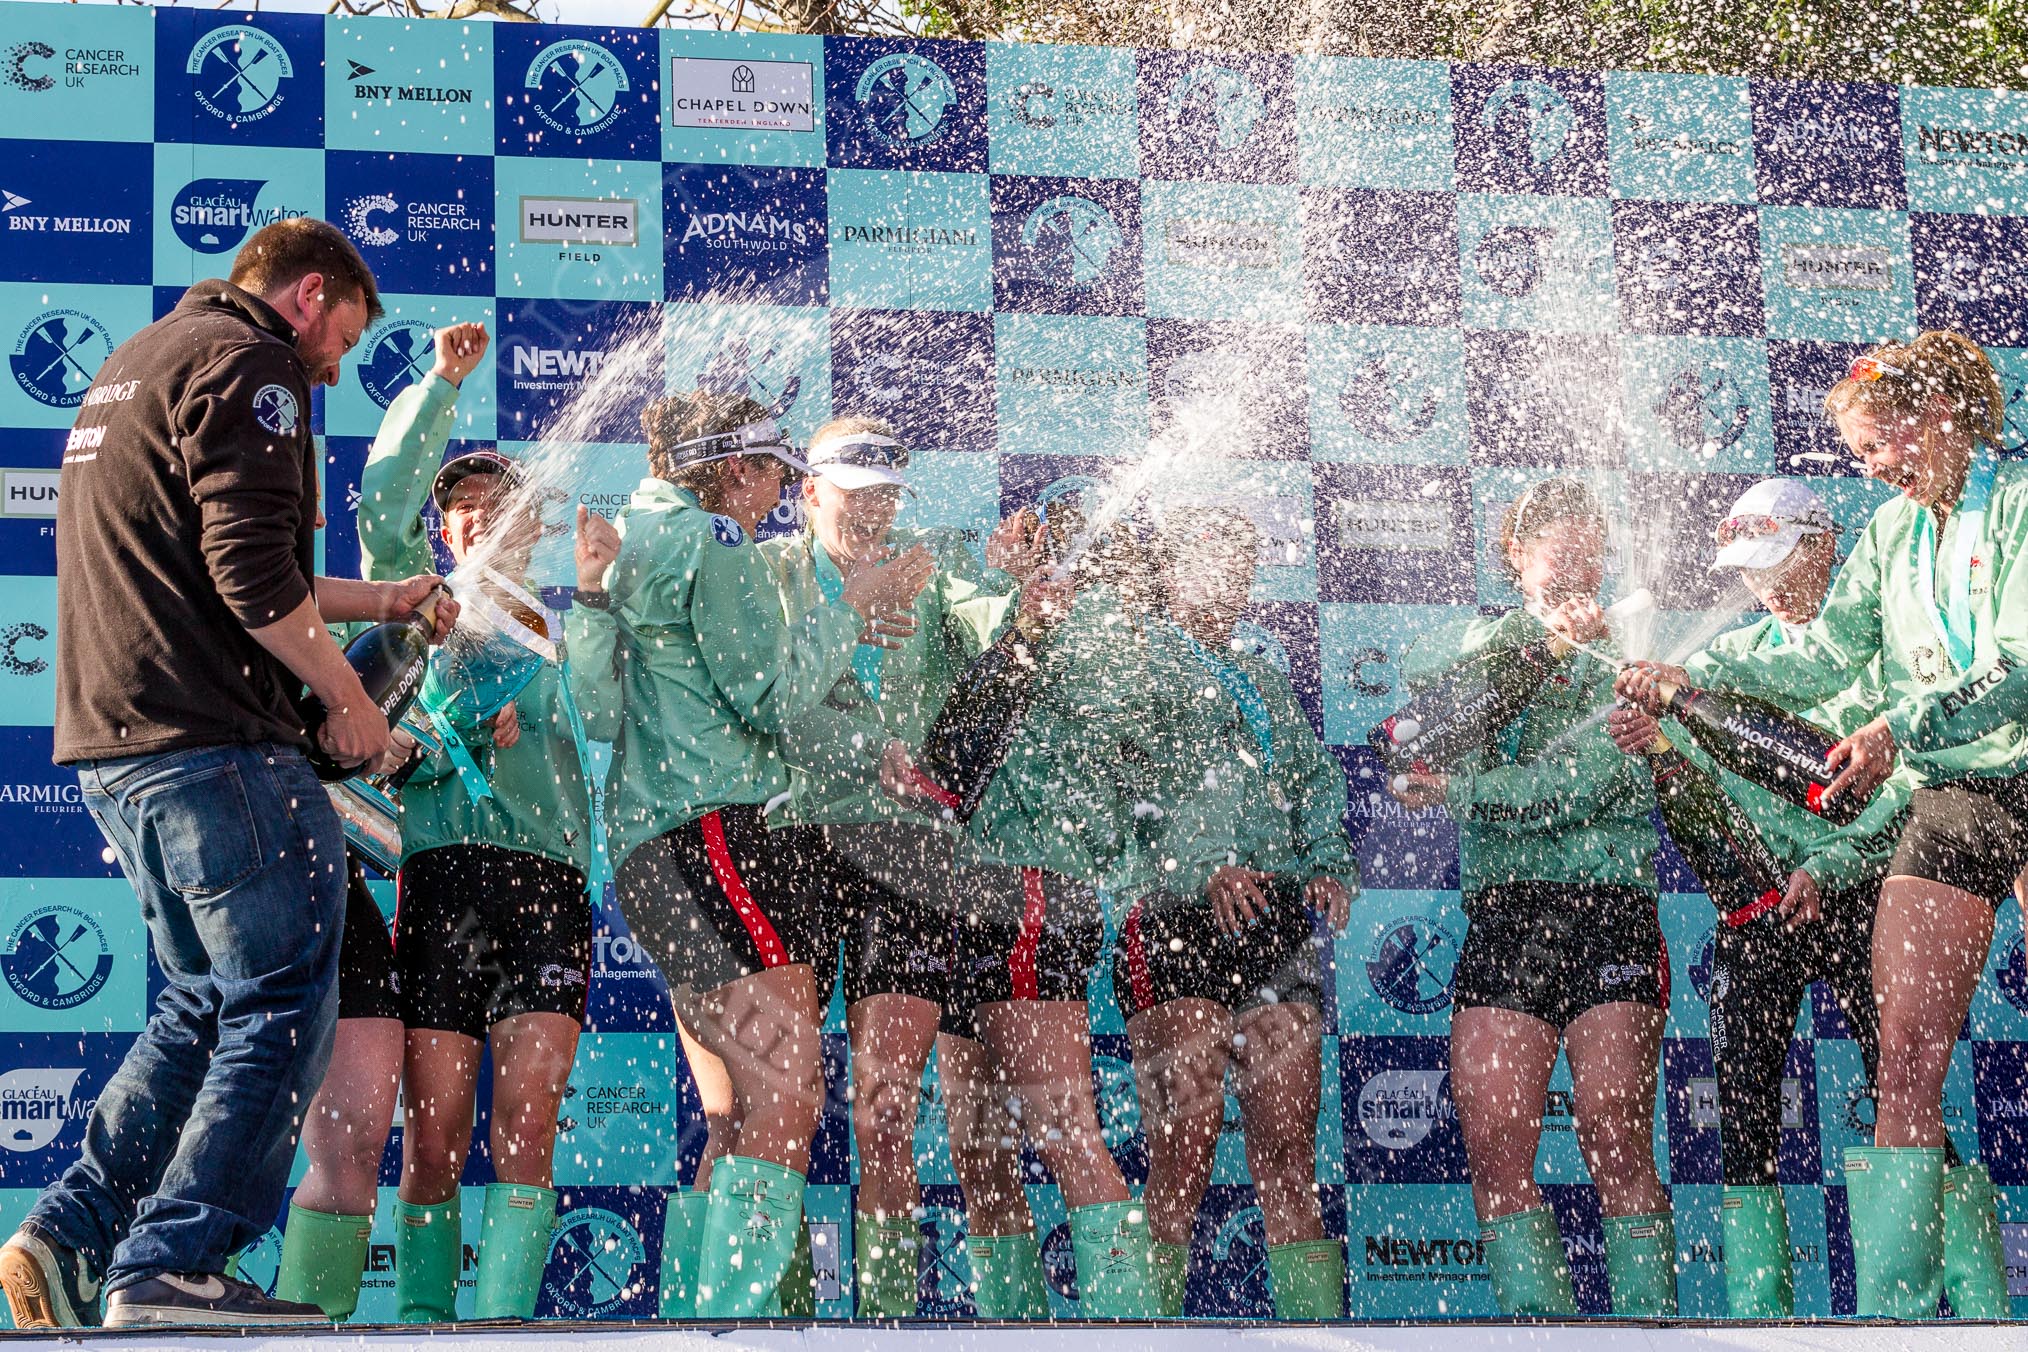 The Boat Race season 2017 -  The Cancer Research Women's Boat Race: CUWBC covered in spray (Cahmpagne, not Thames water) at the price giving.
River Thames between Putney Bridge and Mortlake,
London SW15,

United Kingdom,
on 02 April 2017 at 17:13, image #260